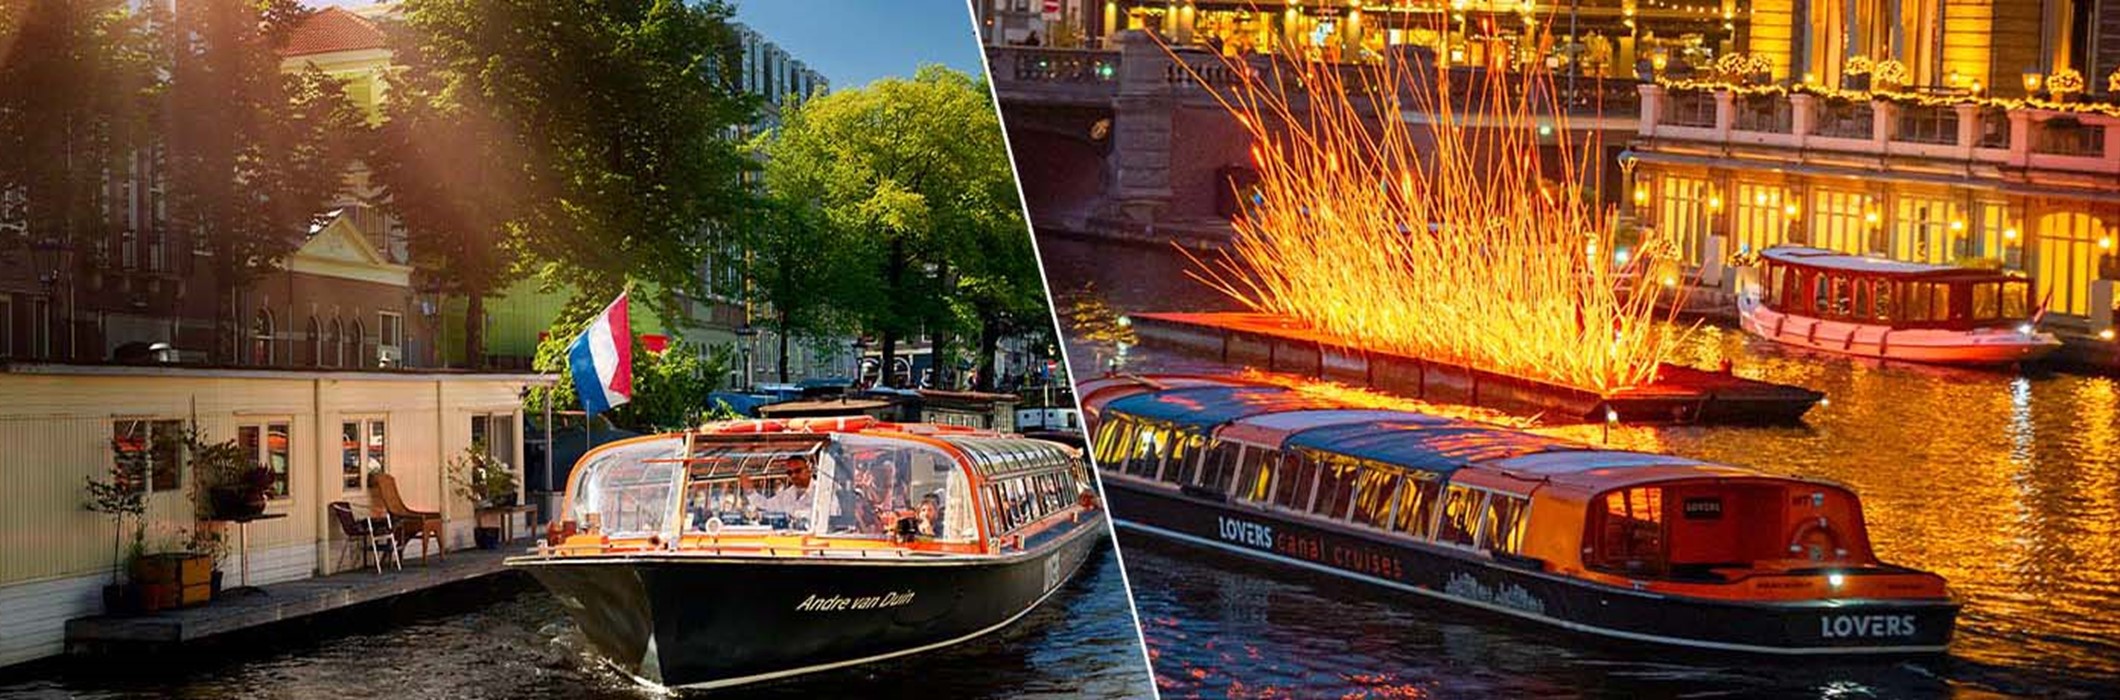 Amsterdam canal cruise by day and night